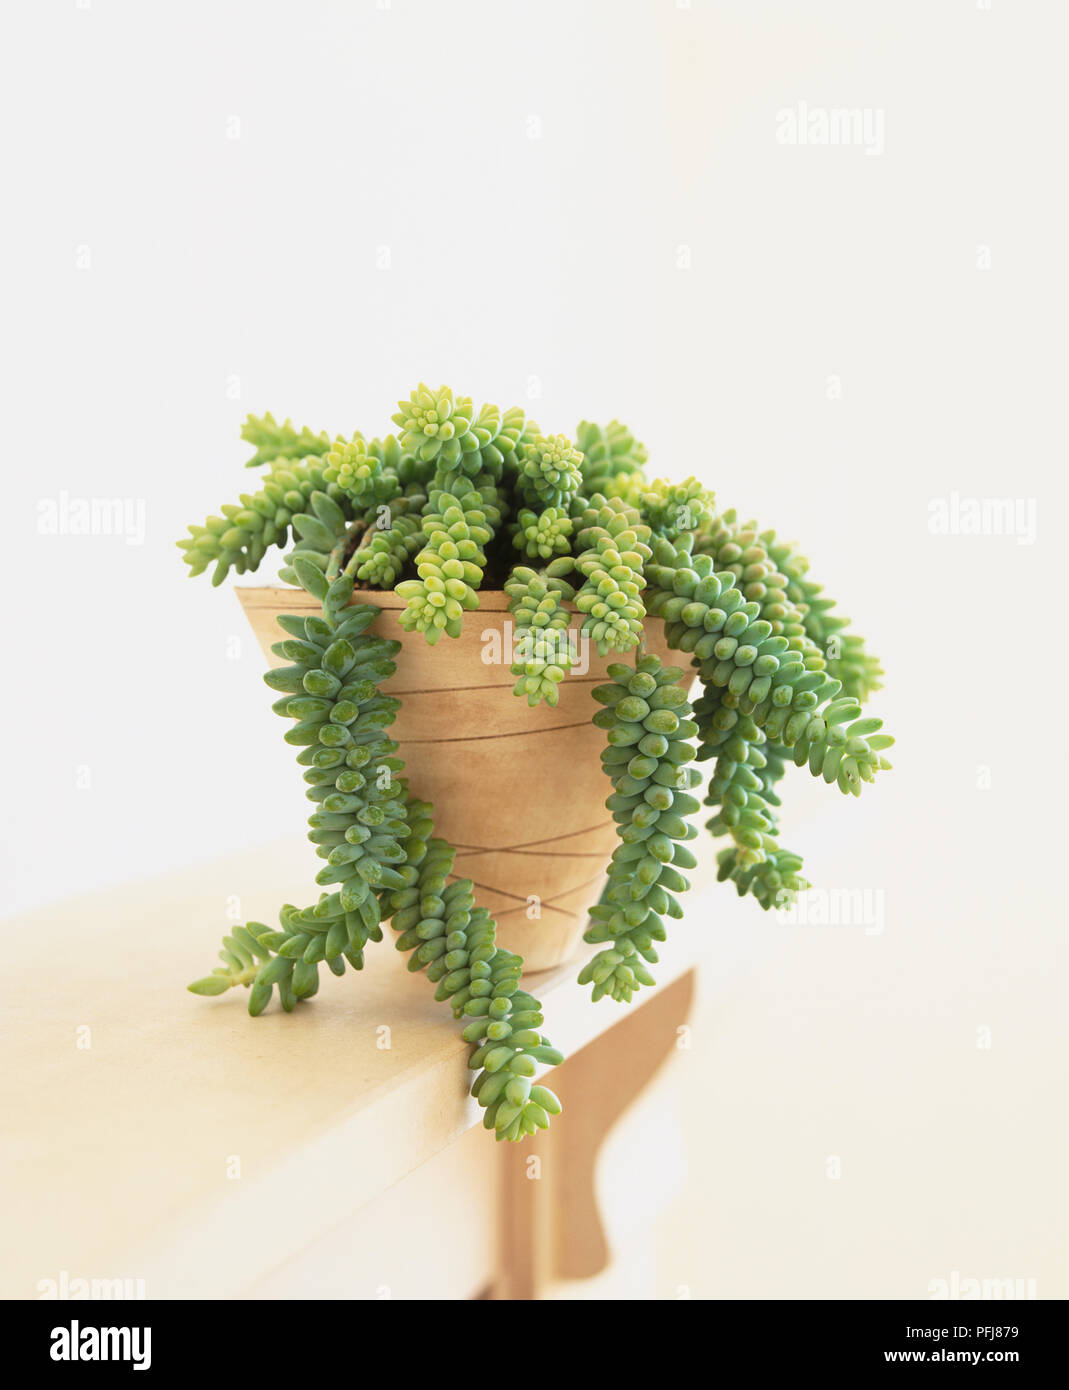 Sedum morganianum, Donkey's tail plant, potted chunky succulent hanging in grey strands, side view. Stock Photo